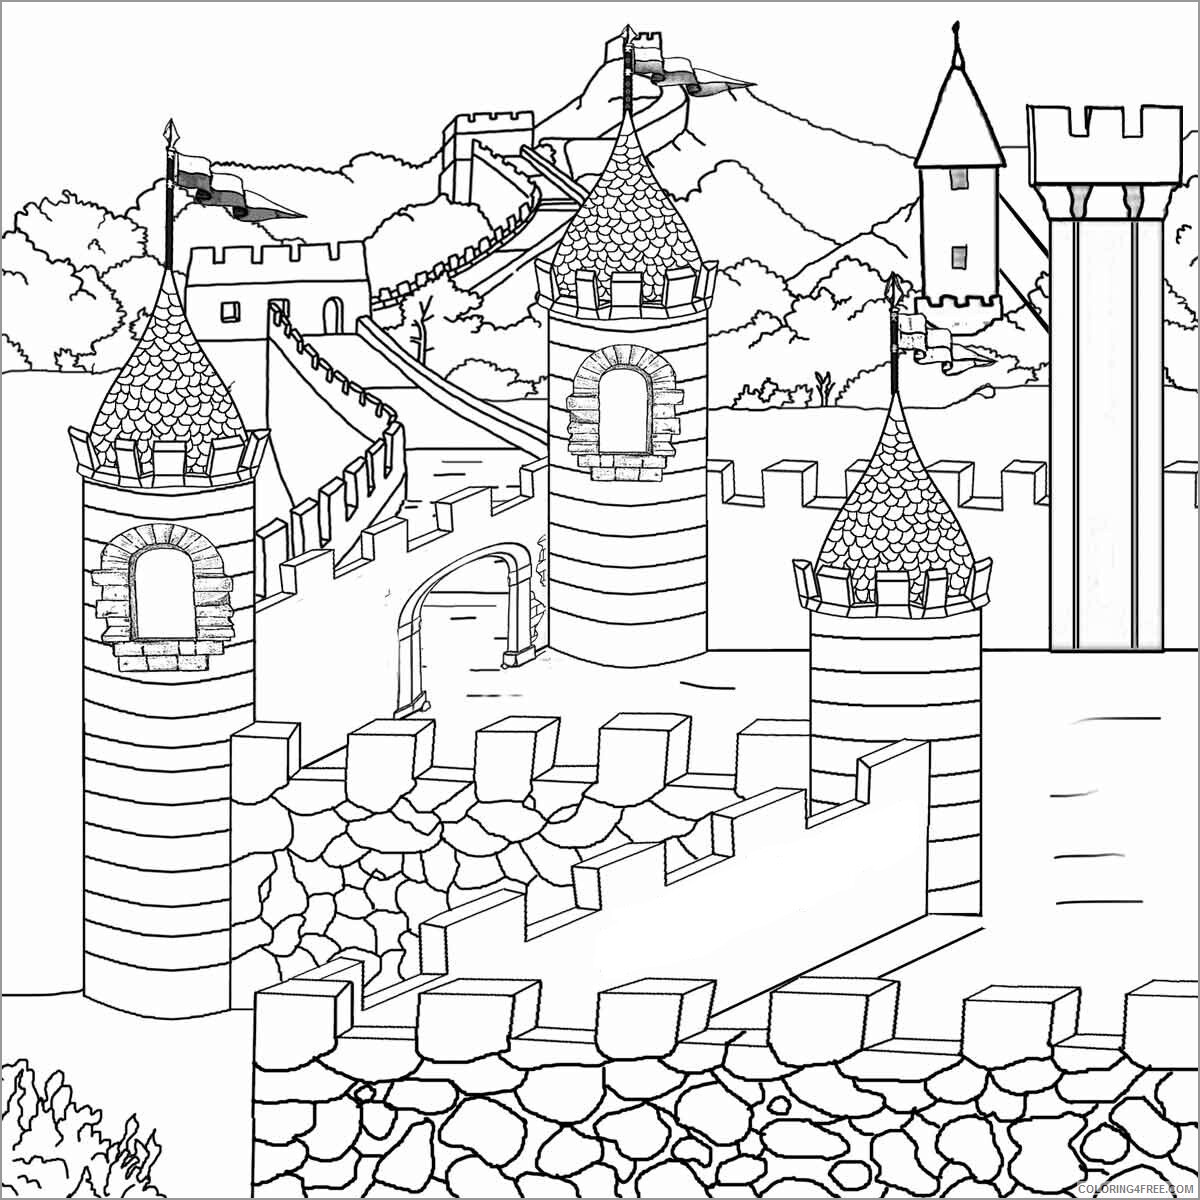 Castle Coloring Pages for boys castle clash of clans Printable 2020 0076 Coloring4free